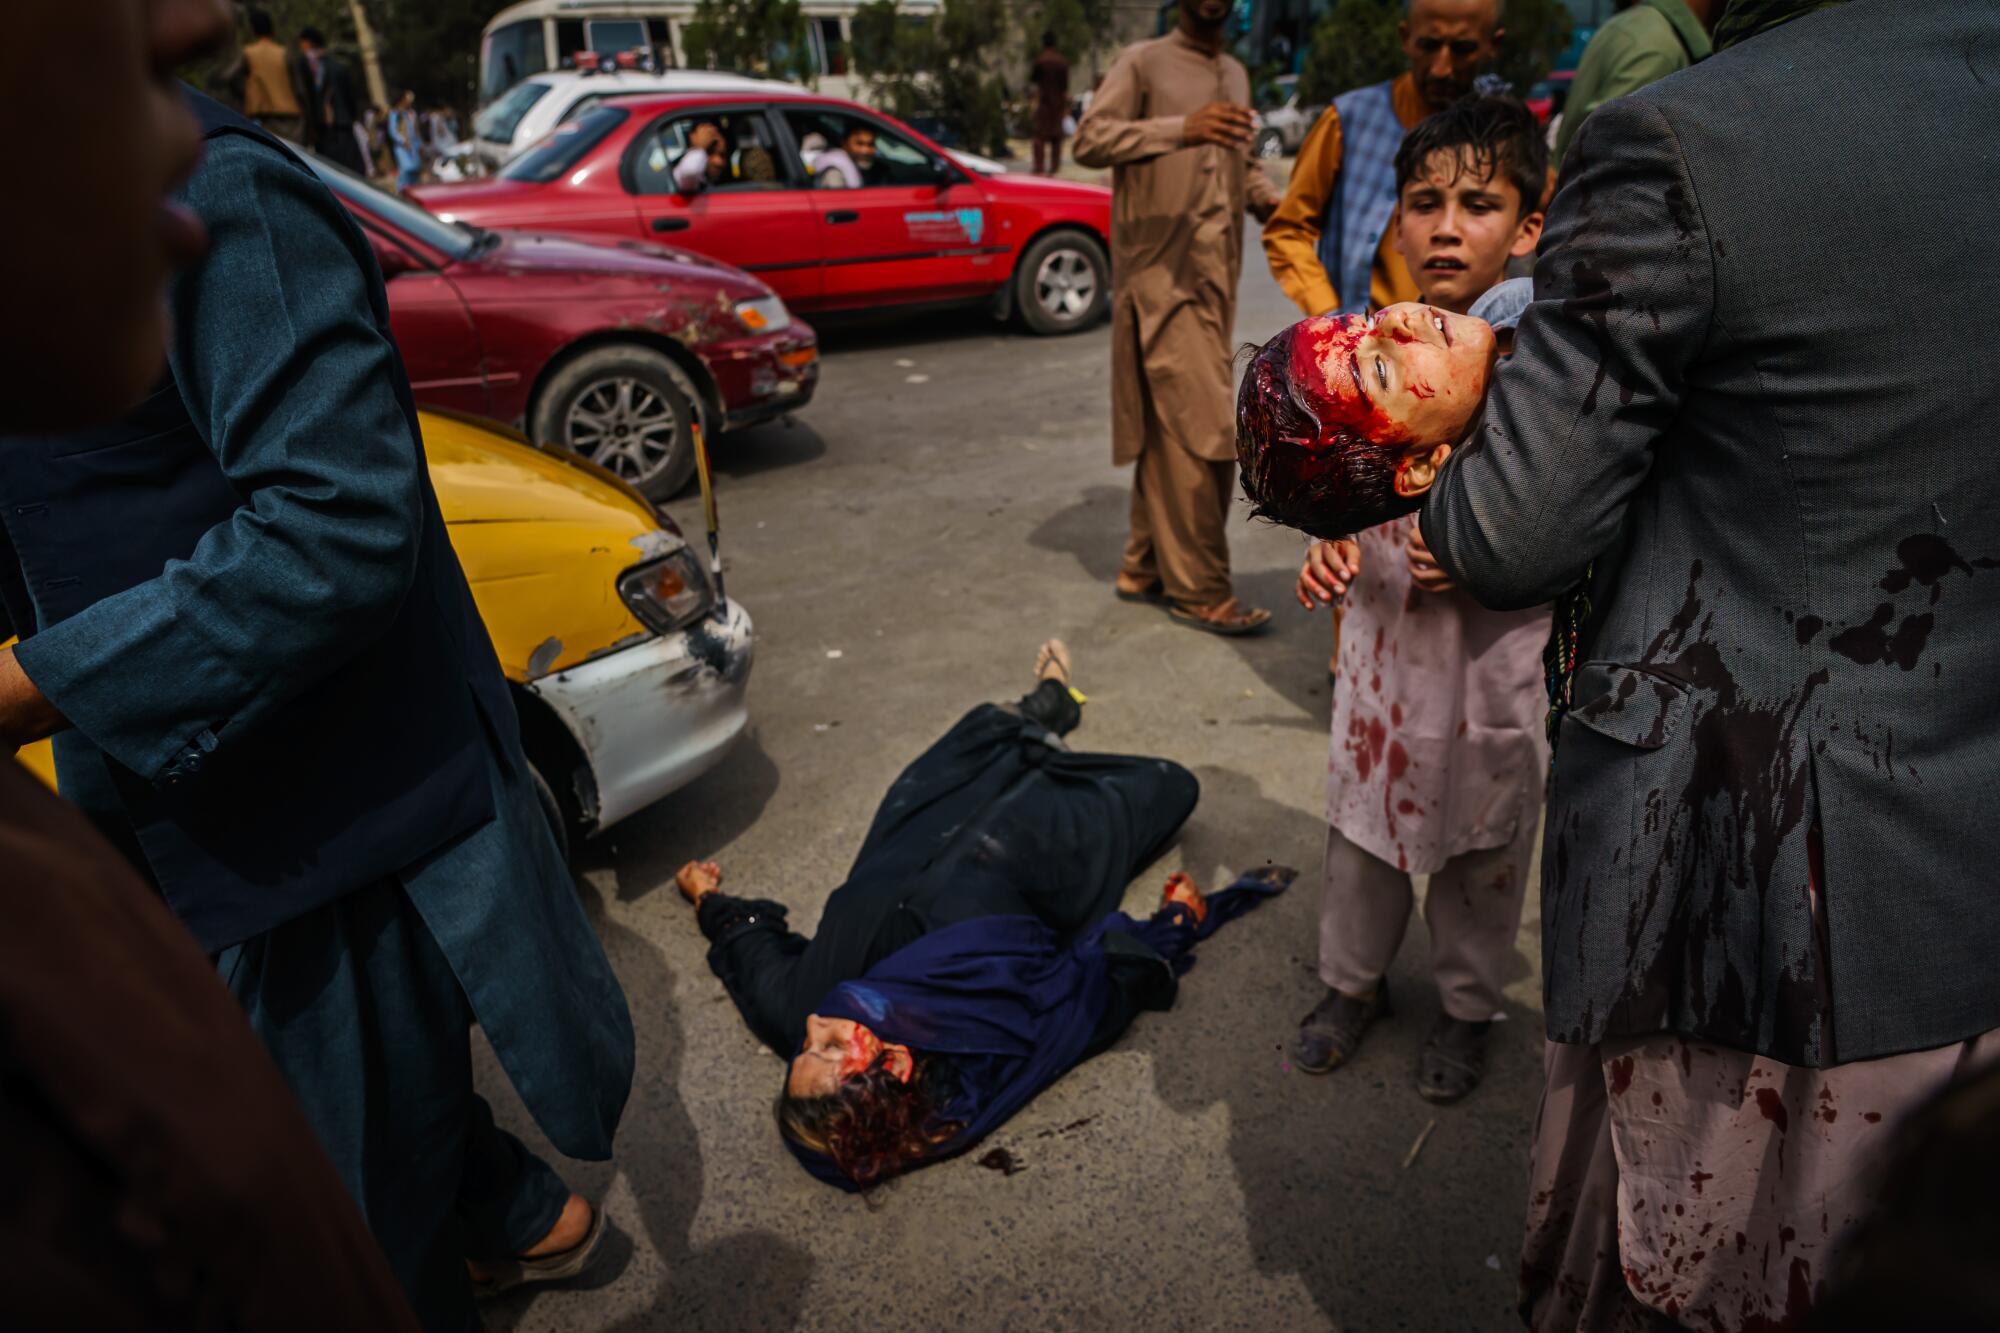 A man carries a bloodied child, as a woman lies wounded on the street.